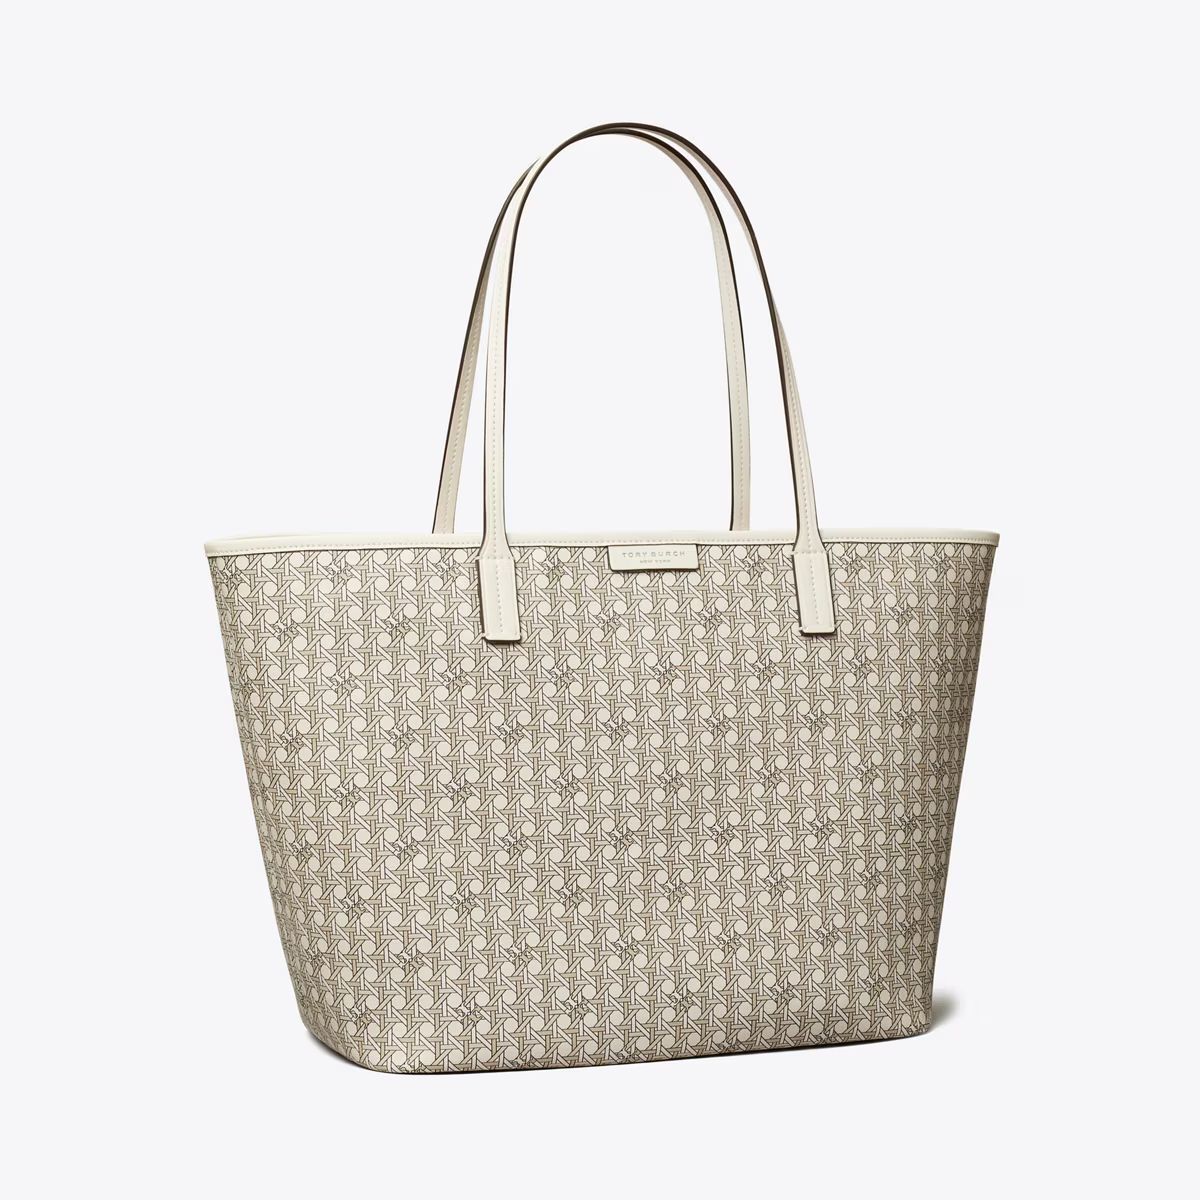 EVER-READY OPEN TOTE | Tory Burch (US)